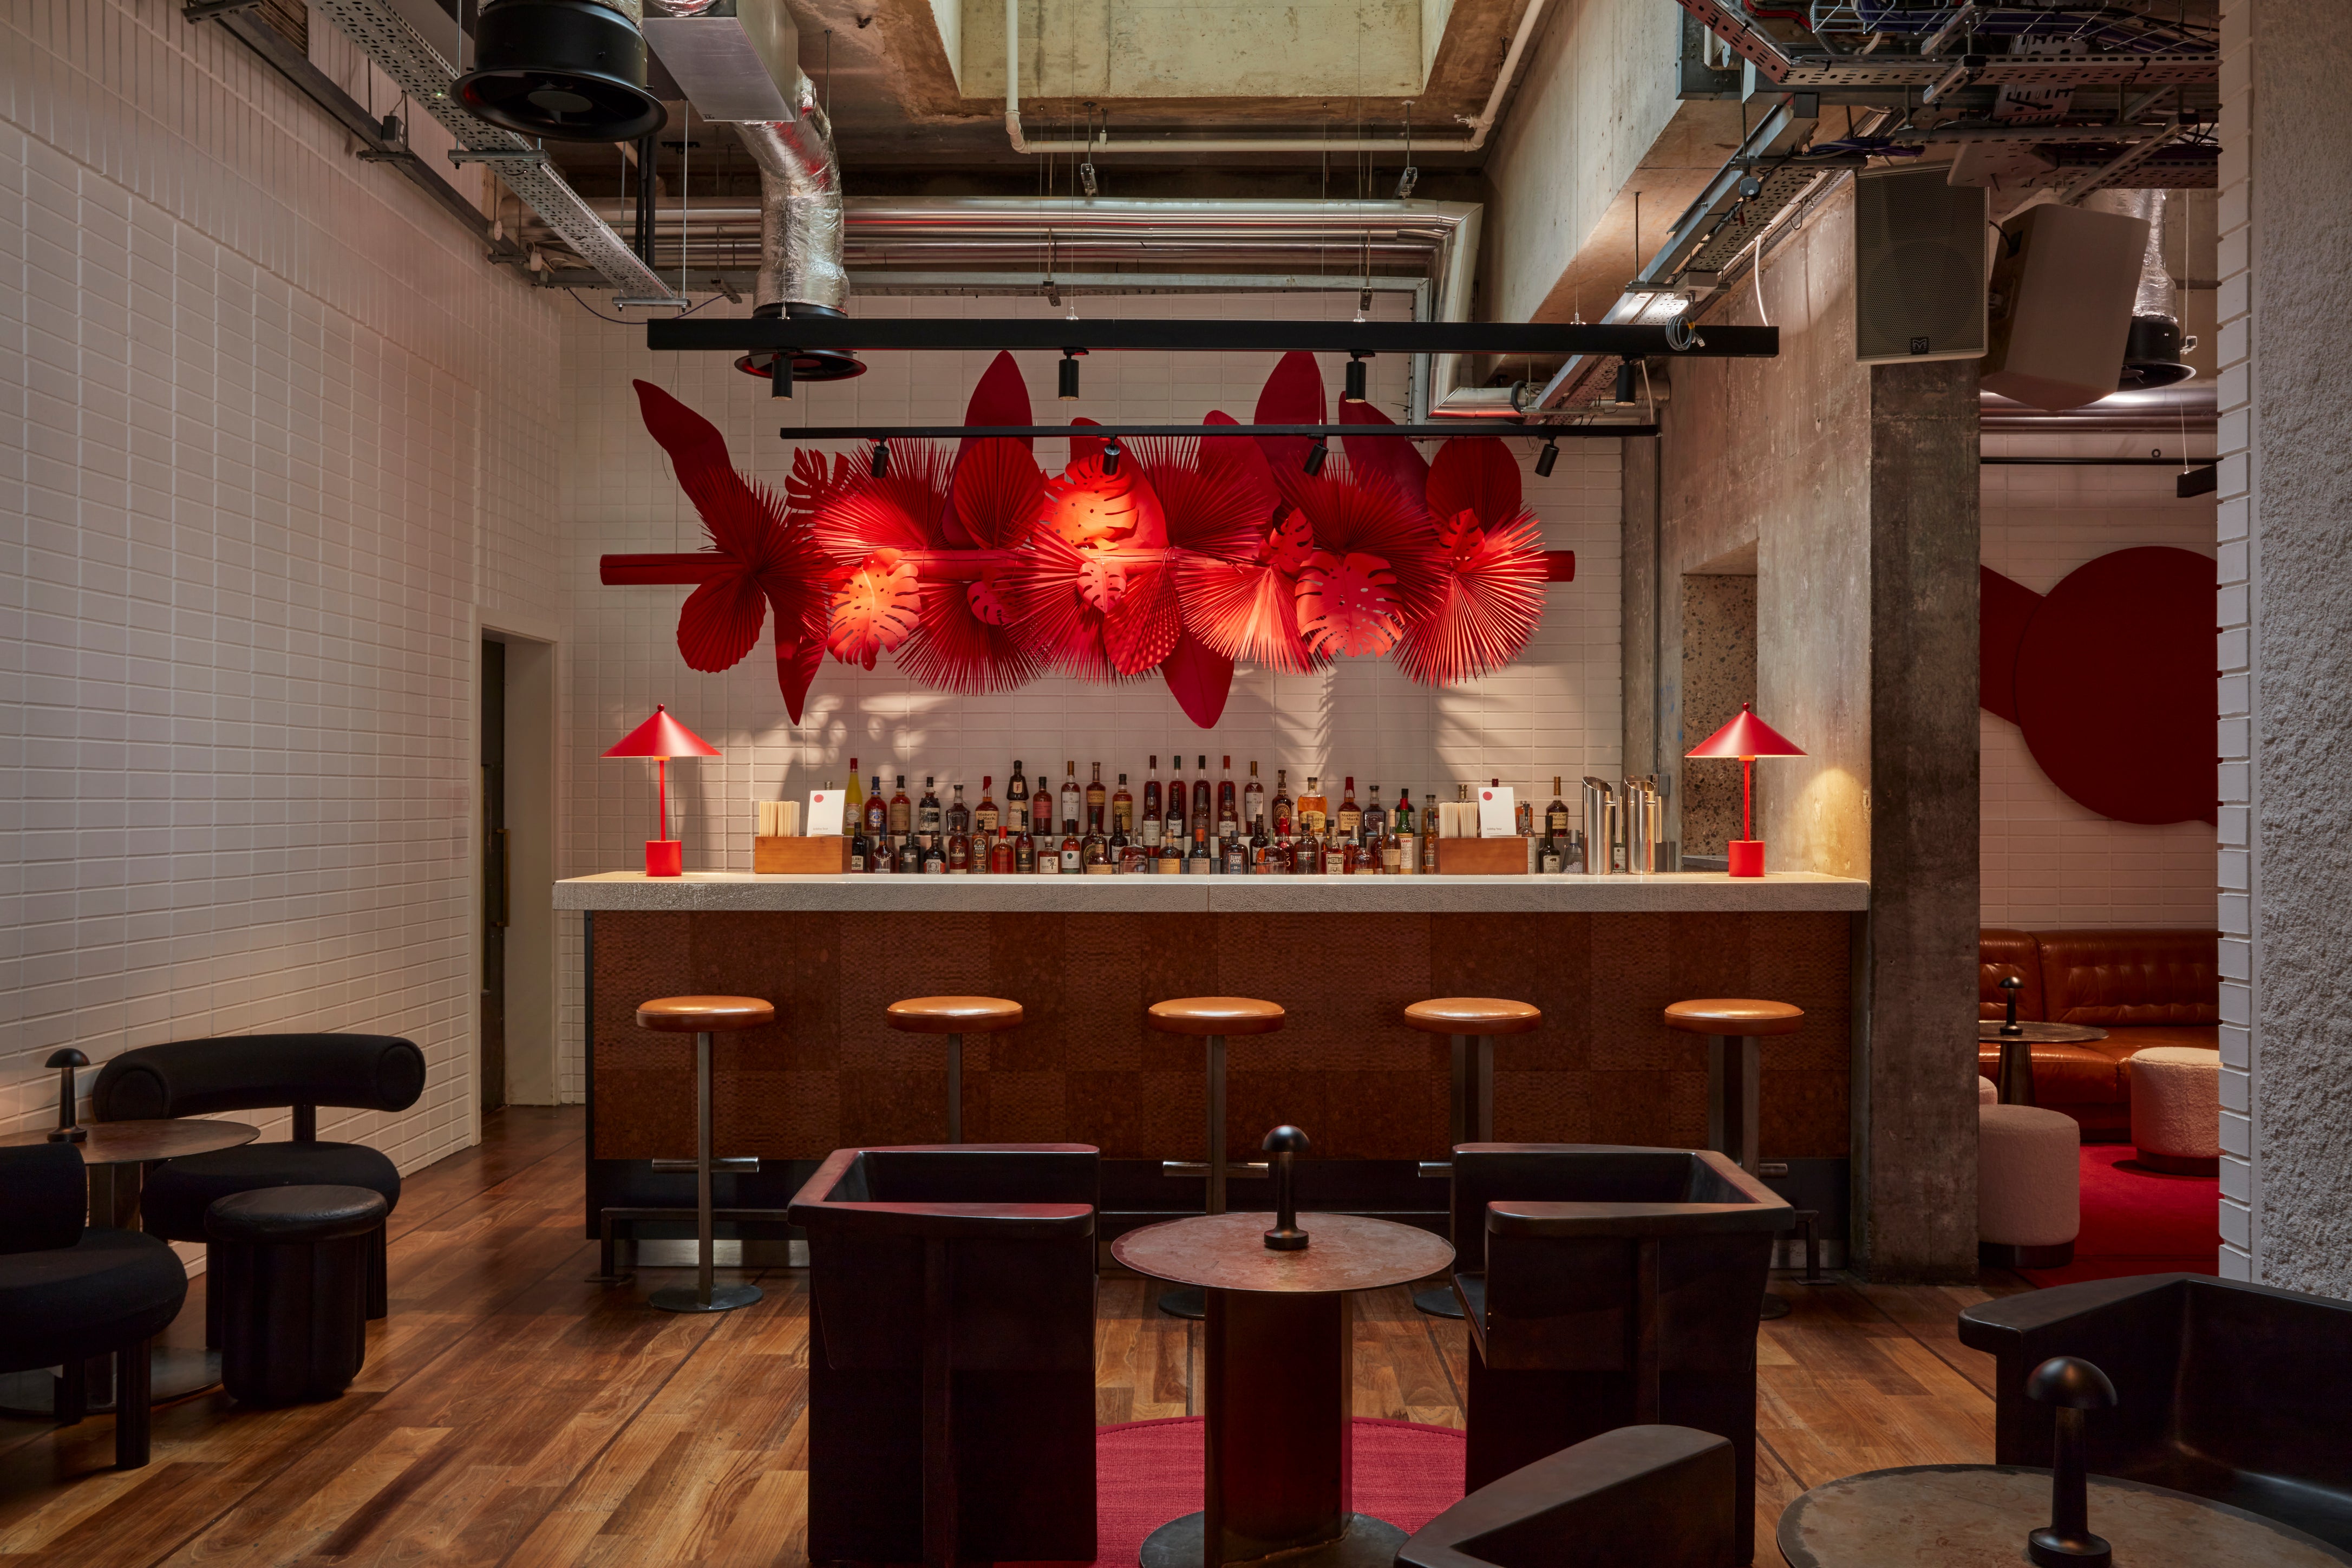 A captivating view of the transformed Lobby Bar at One Hundred Shoreditch Hotel, featuring a stunning giant paper artwork in vibrant red, showcasing the skillful arrangement of tropical leaves.